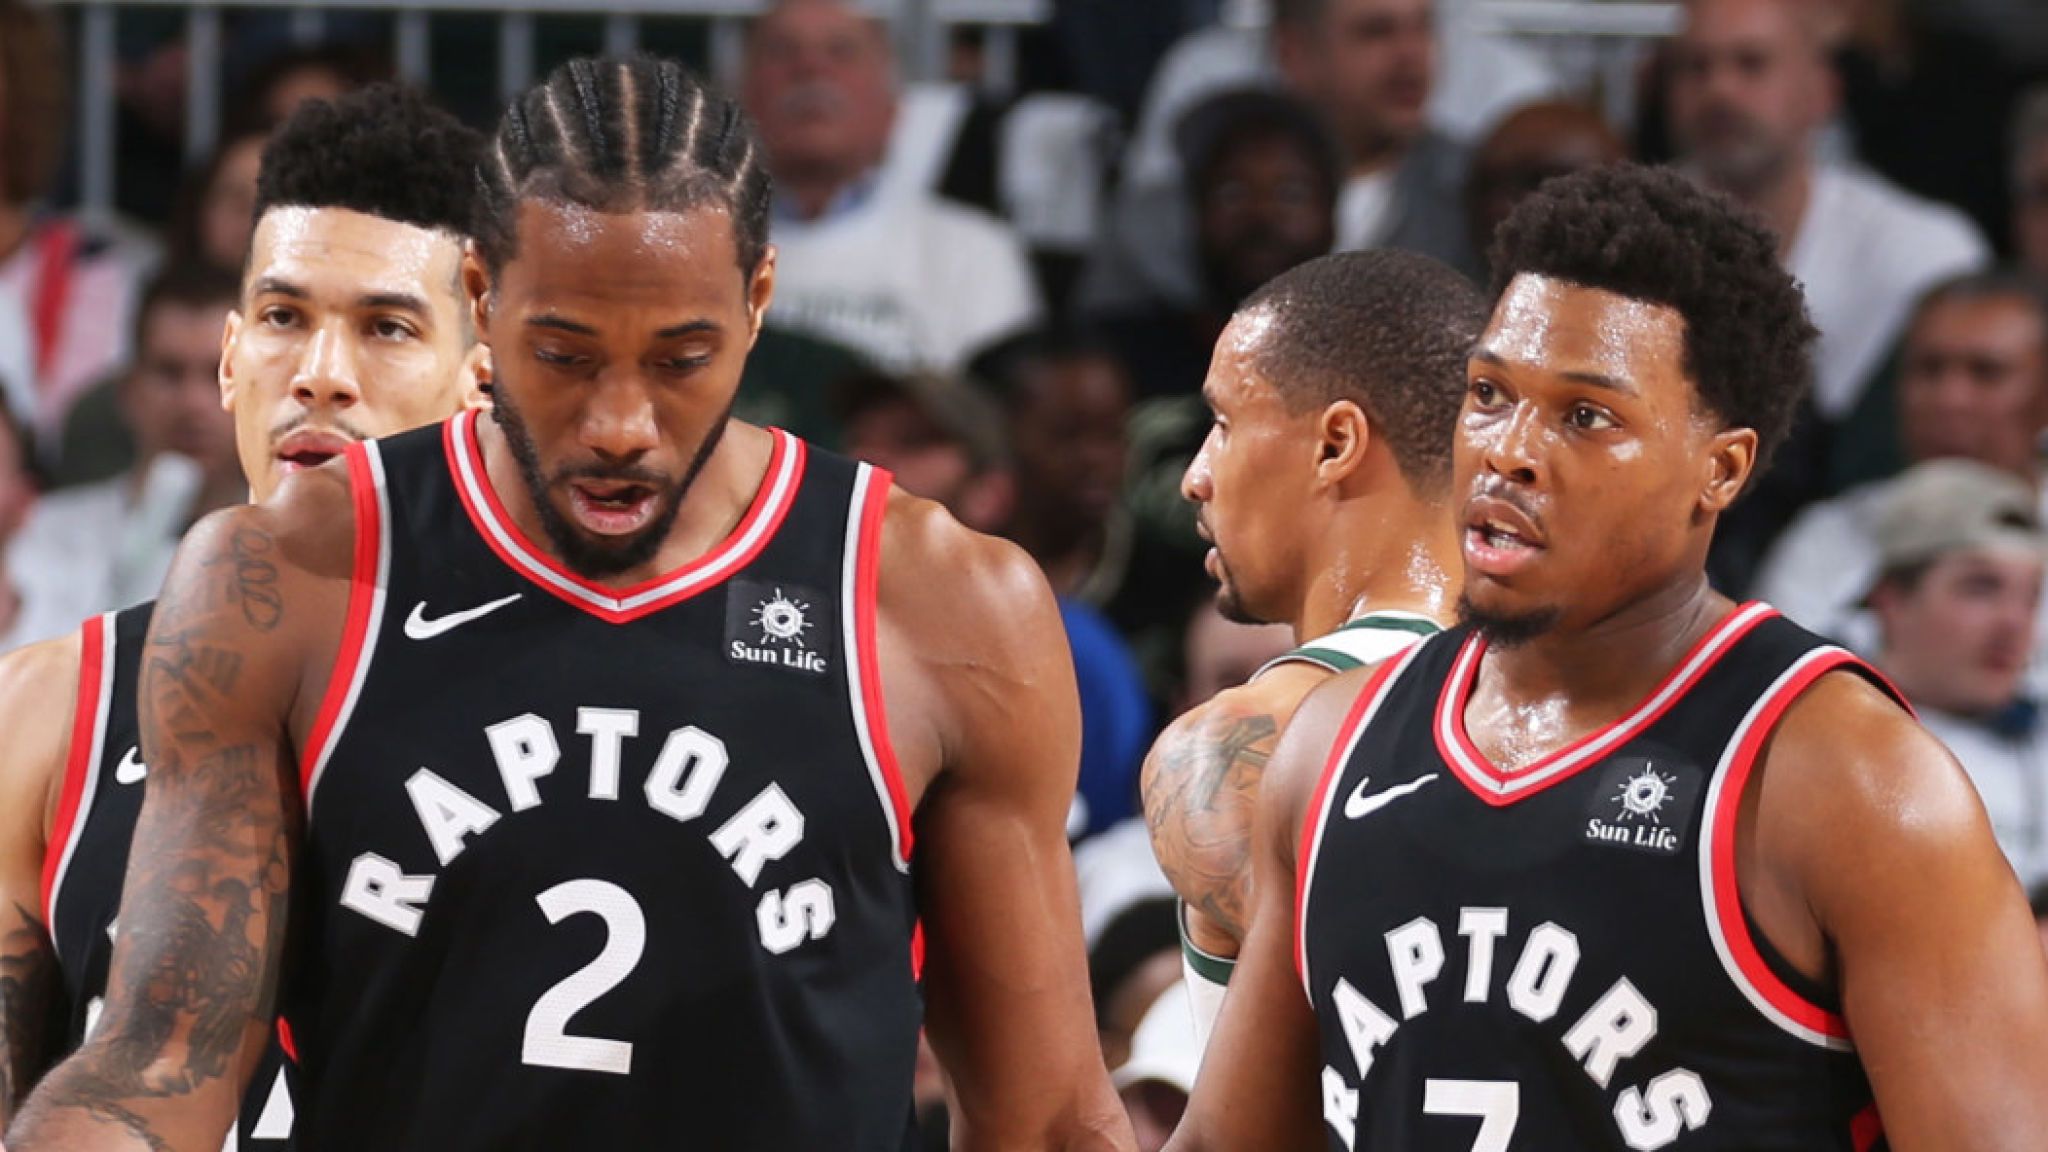 Kawhi Leonard And Kyle Lowry In Action During The Raptors& - Kawhi Leonard And Kyle Lowry - HD Wallpaper 